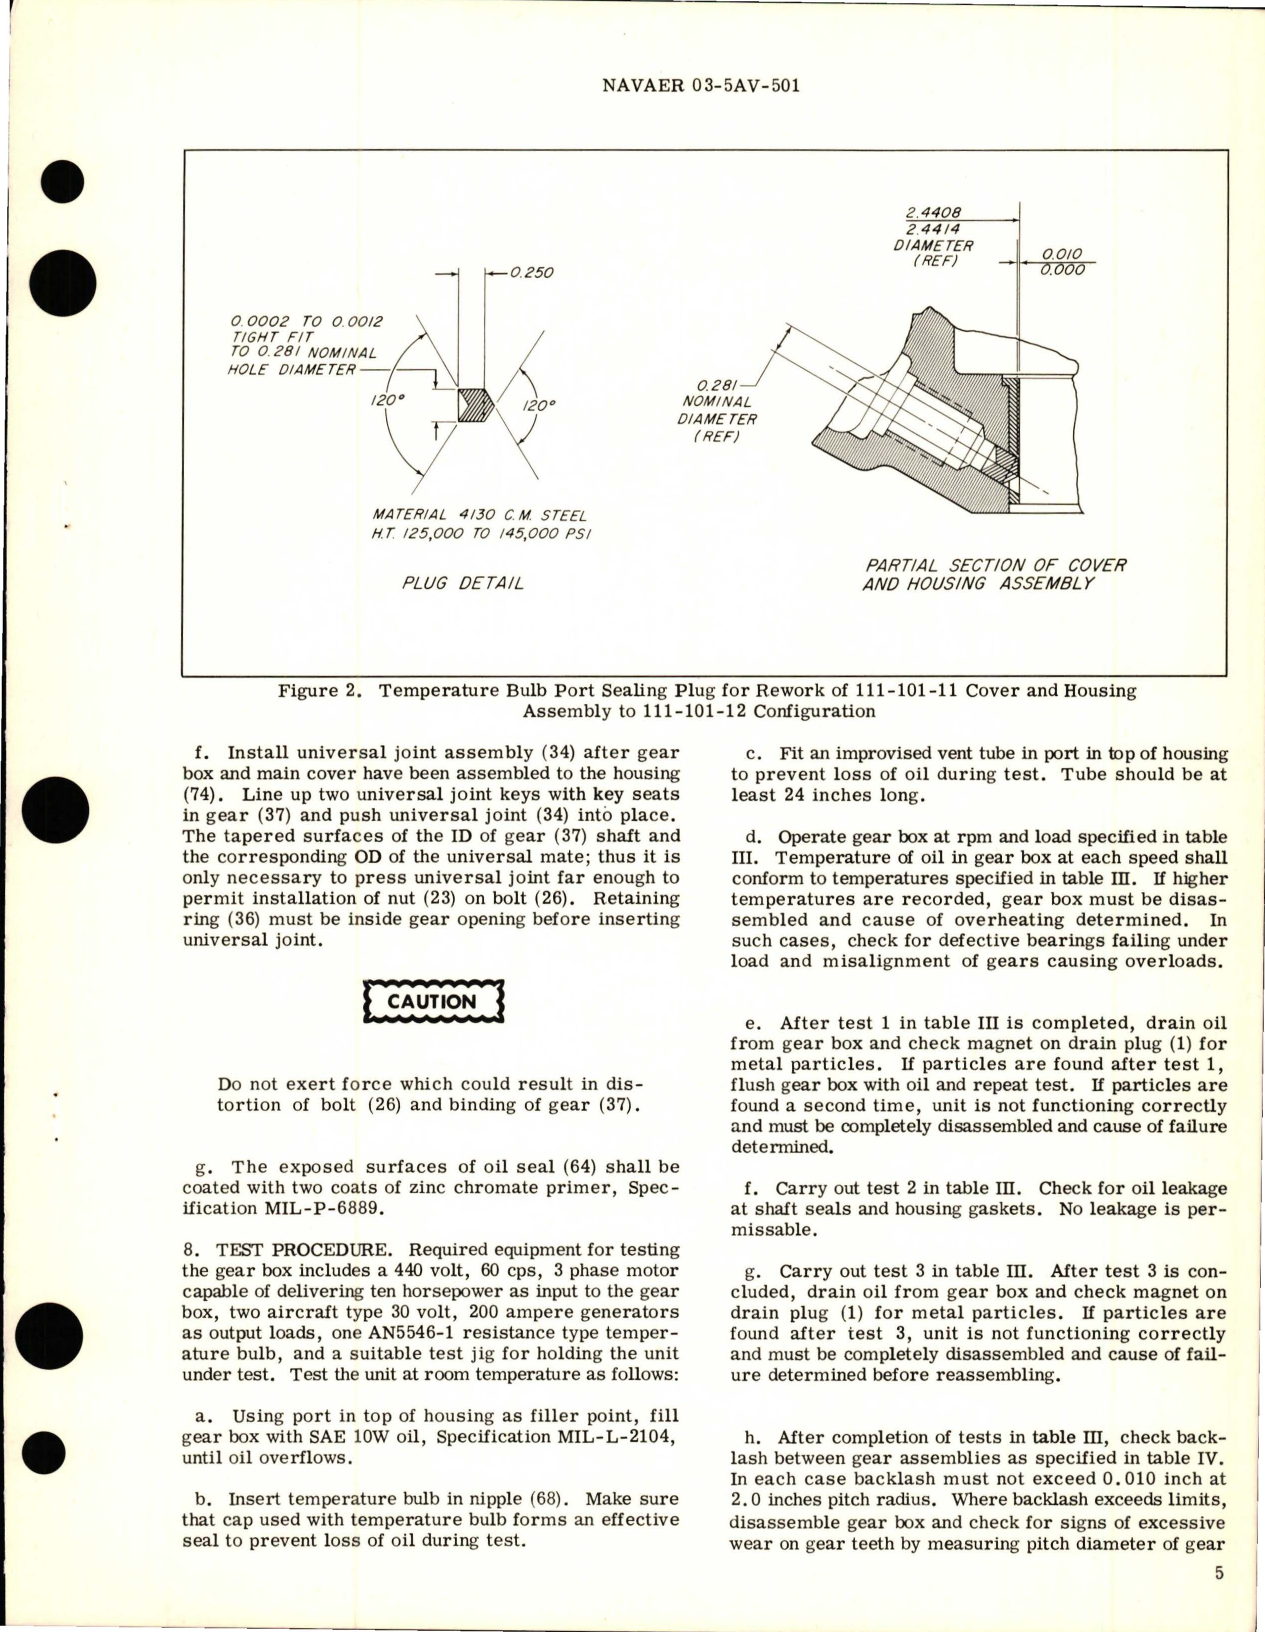 Sample page 5 from AirCorps Library document: Overhaul Instructions with Parts Breakdown for Generator and Alternator Drive Gear Box - Parts 111-100-11 and 111-100-12 